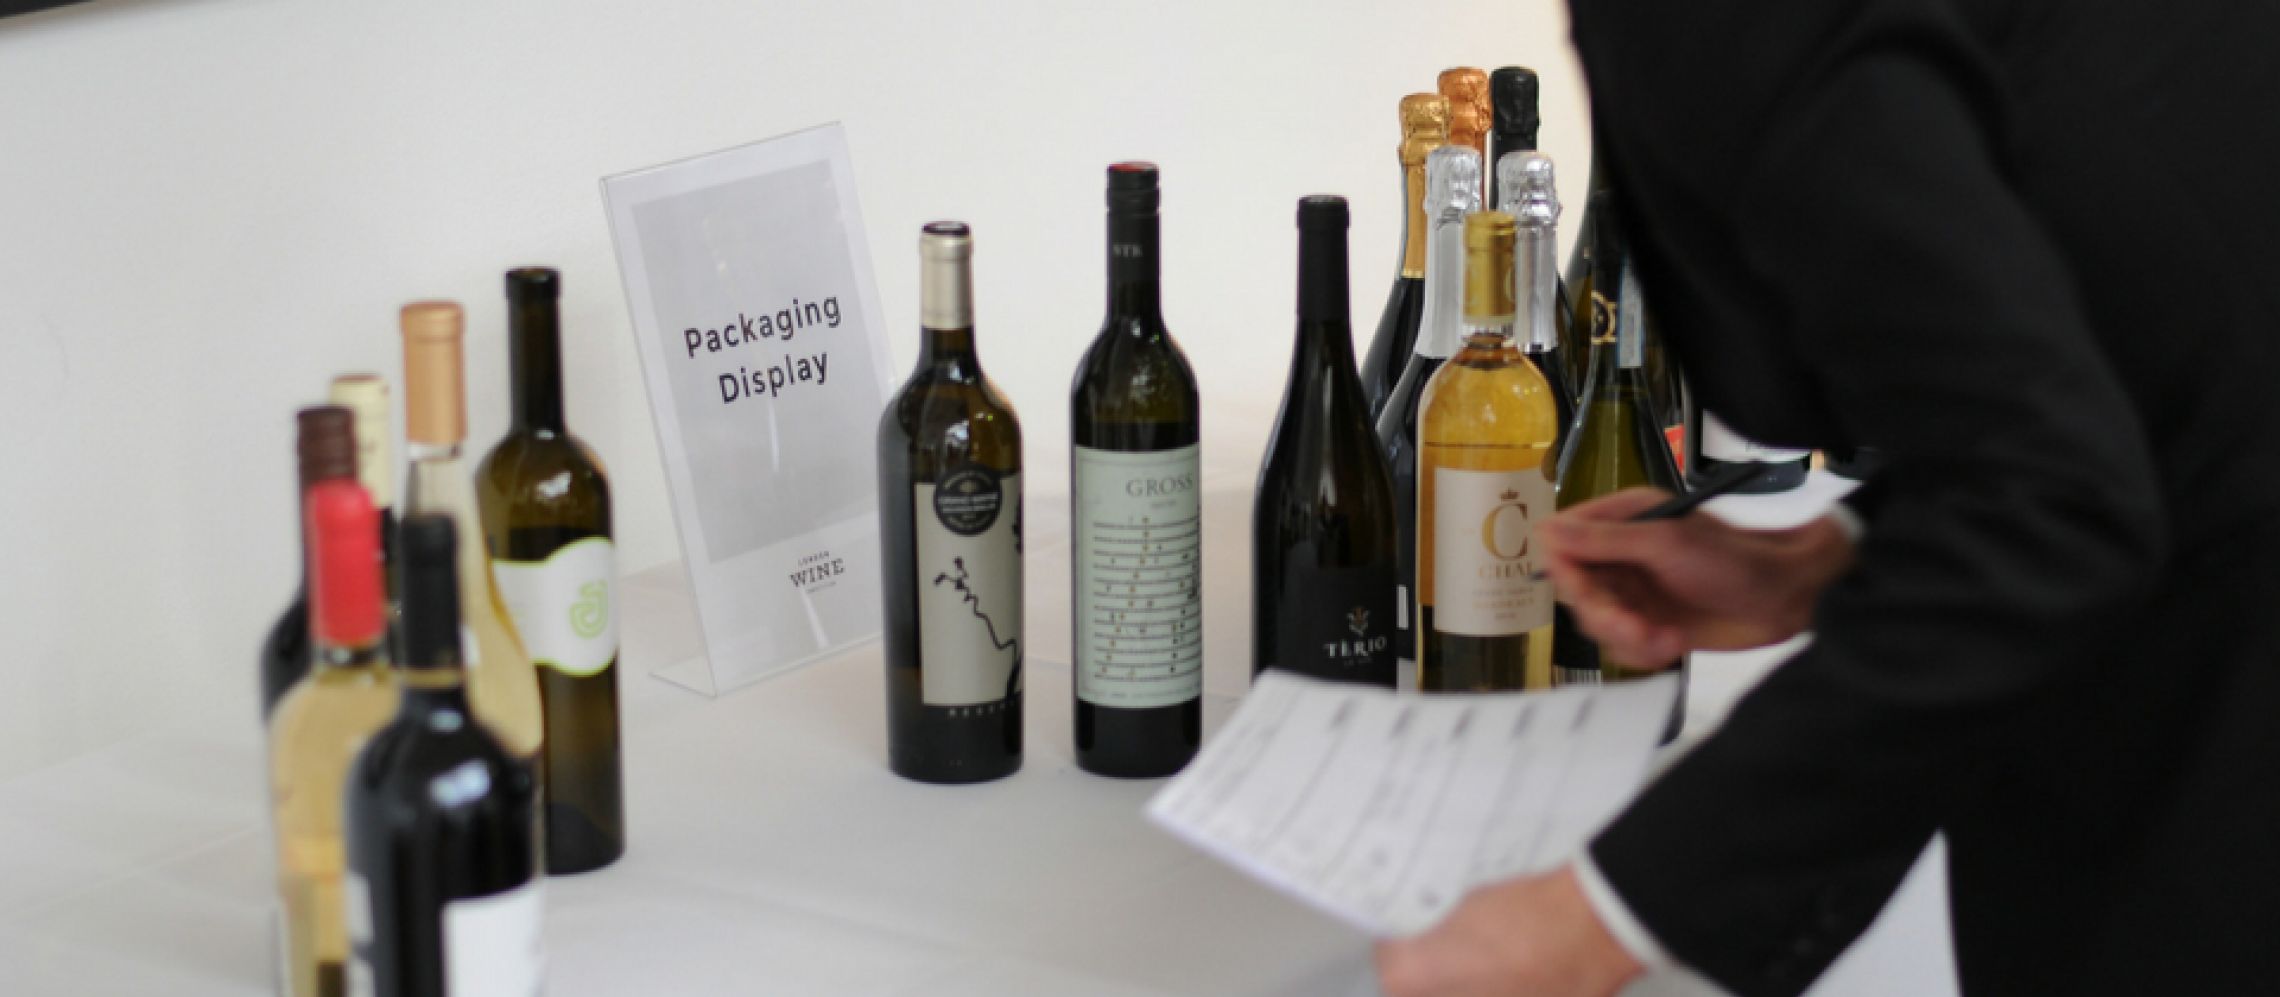 Photo for: Wine Packaging trends in the Restaurant Business.